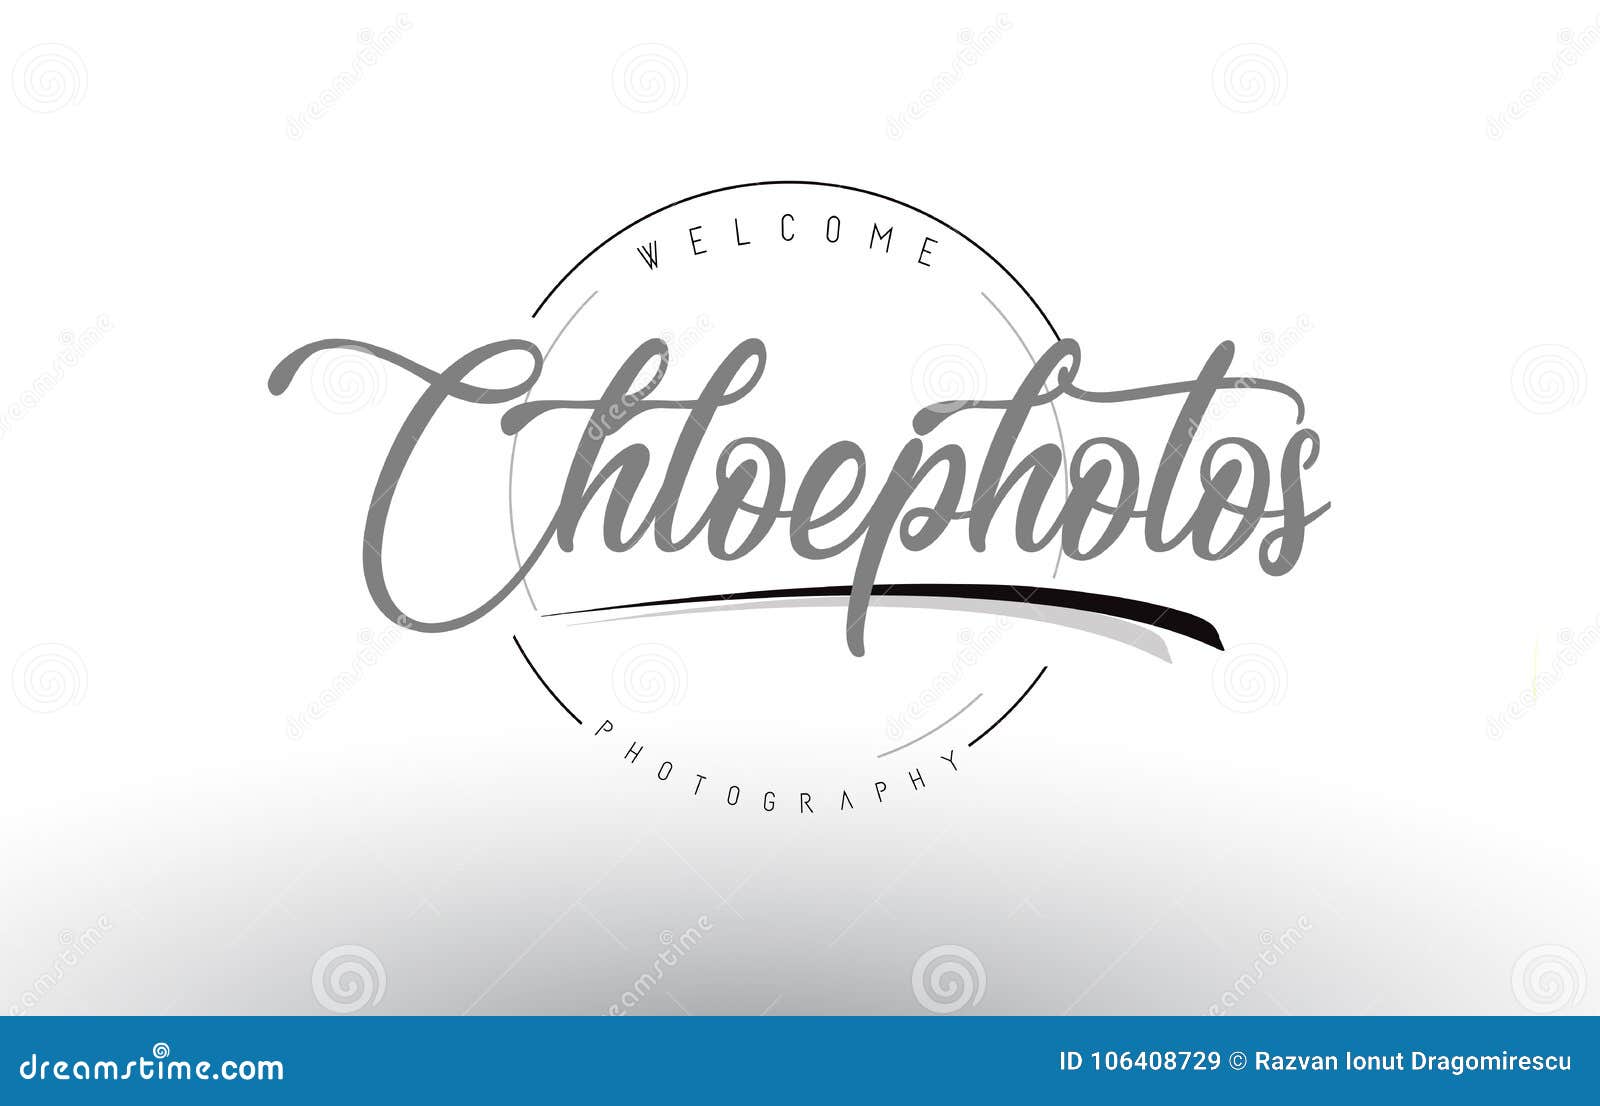 Chloe Personal Photography Logo Design with Photographer Name